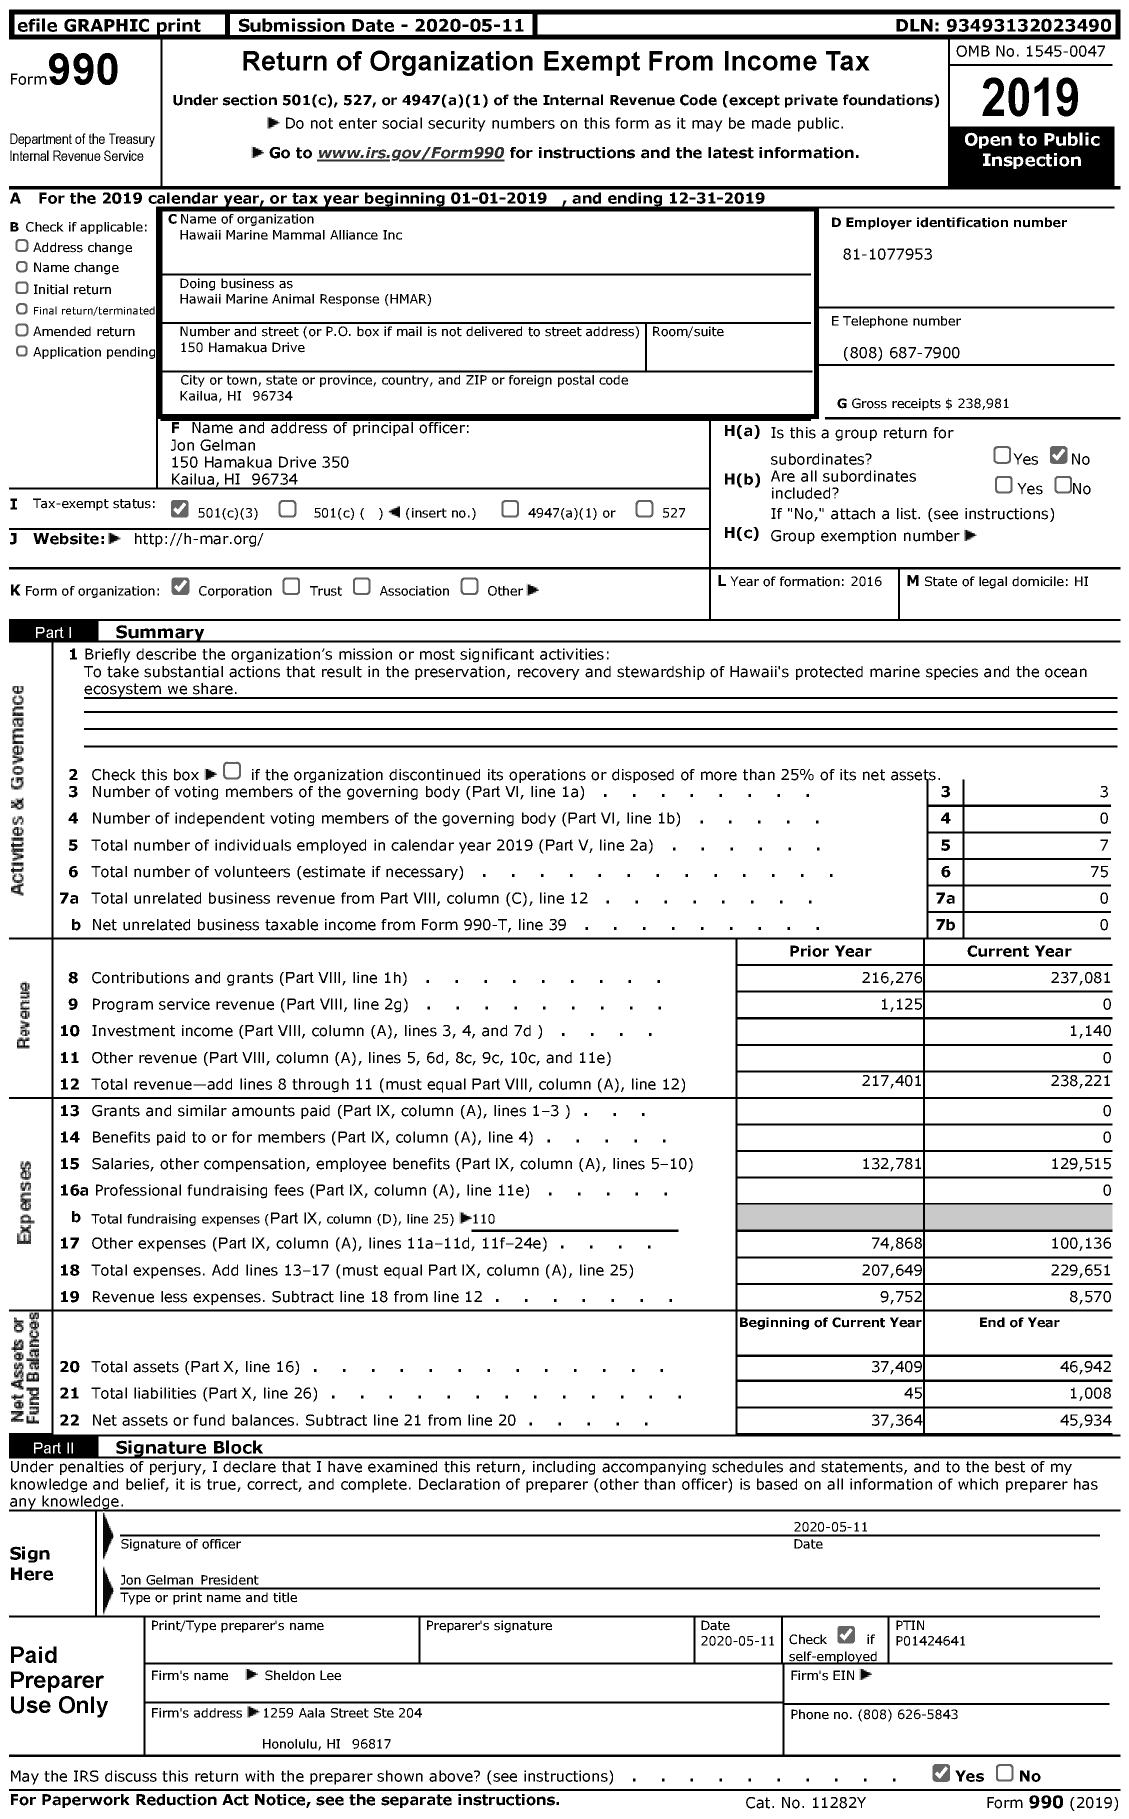 Image of first page of 2019 Form 990 for Hawaii Marine Animal Response (HMAR)